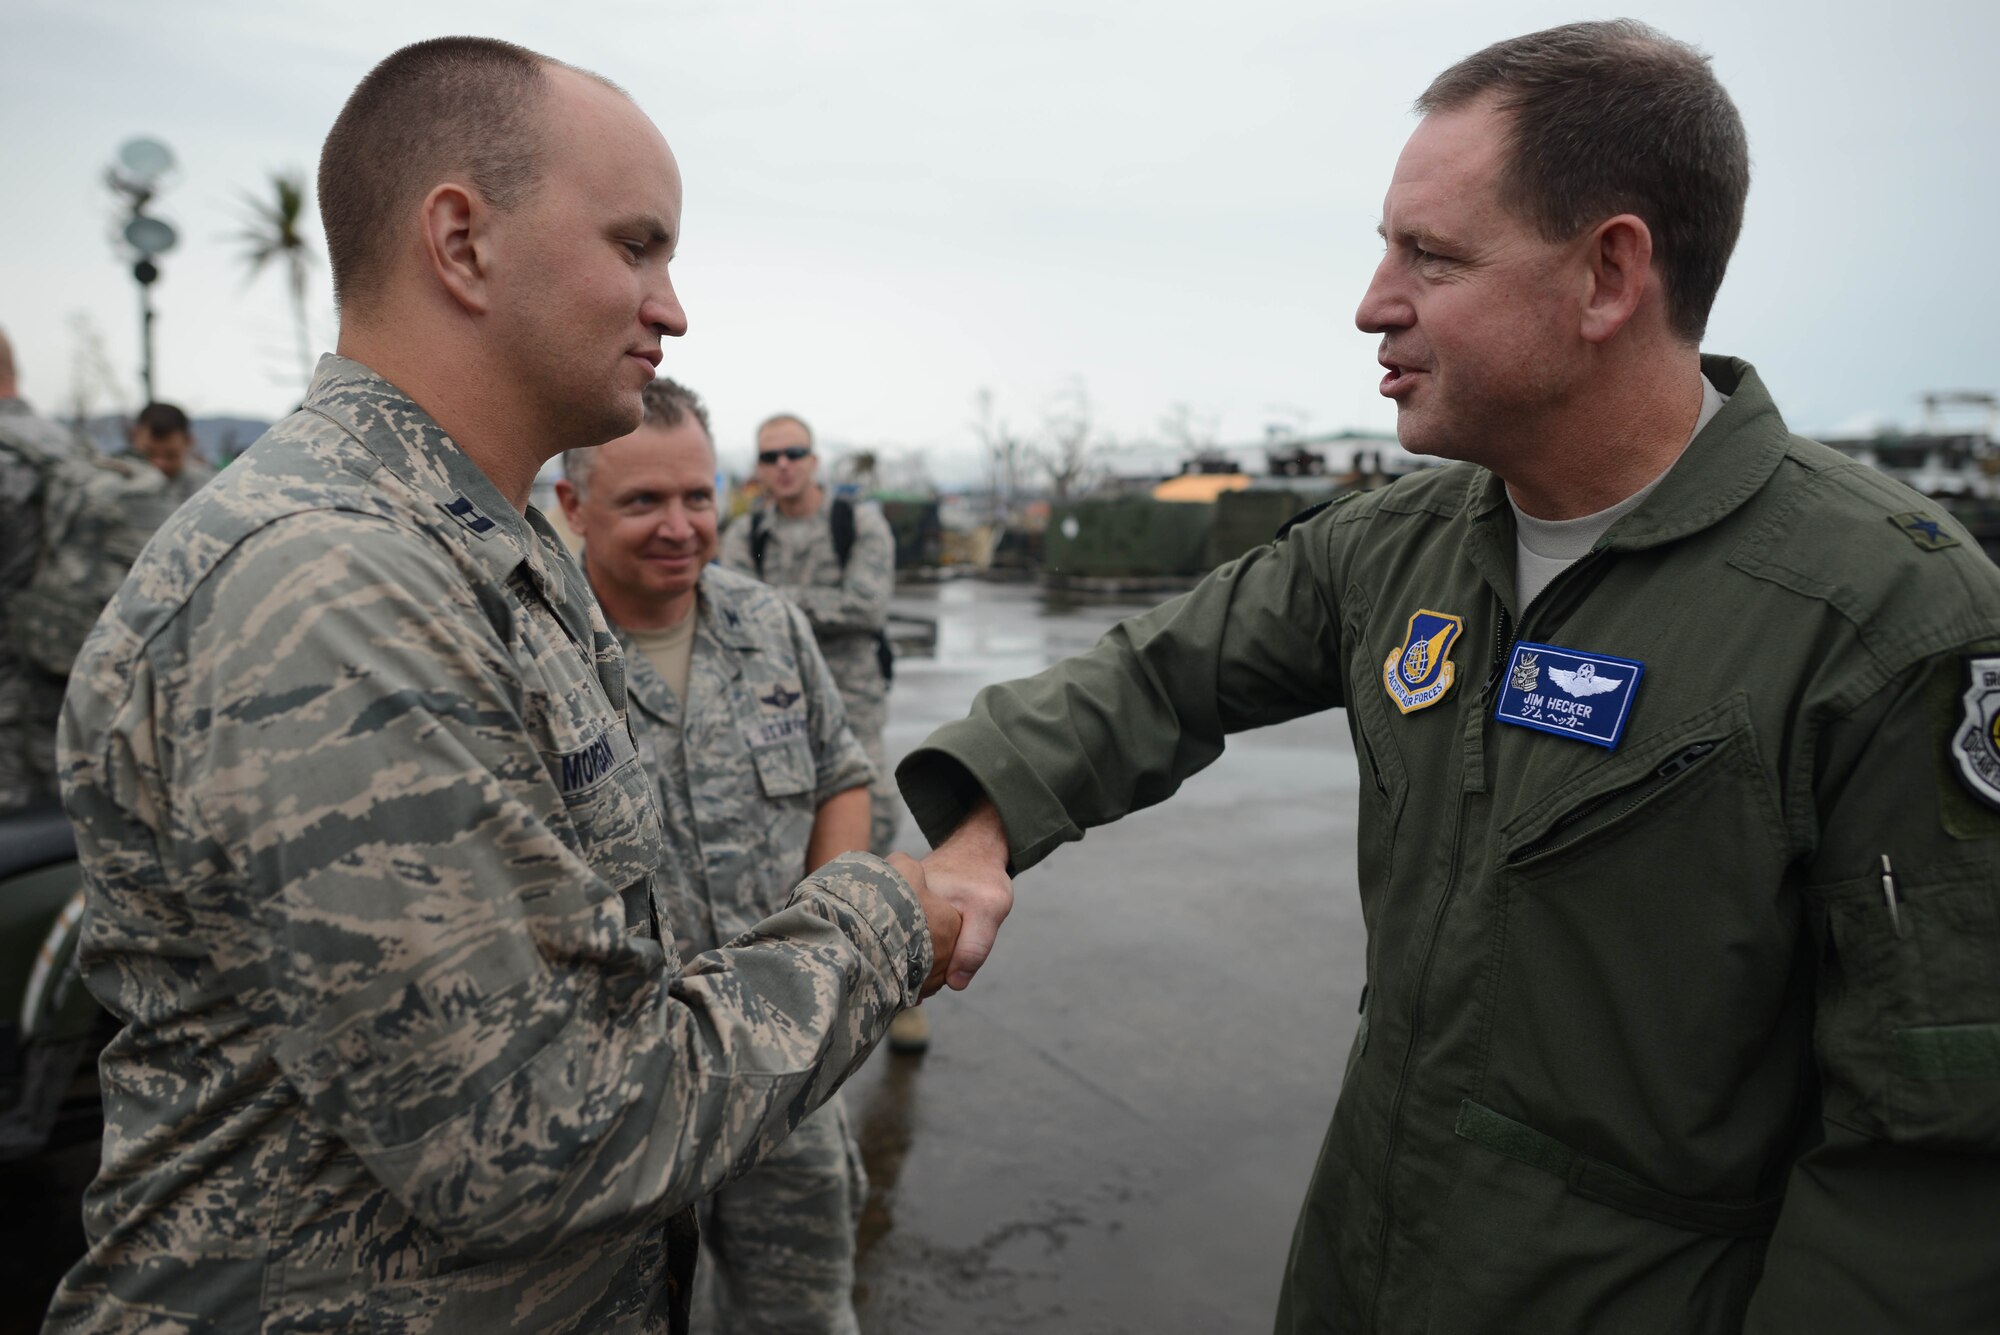 Capt. Clark Morgan, 36th Mobility Response Squadron Contingency Engineering Flight commander, shakes the hand of Brig. Gen. Jim Hecker, 18th Wing commander, Nov, 23, 2013, during Operation Damayan in Tacloban, Philippines. Operation Damayan is a humanitarian aid and disaster relief operation led by the Philippine government and supported by a multinational response force. (U.S. Air Force photo by 2nd Lt. Jake Bailey/Released)